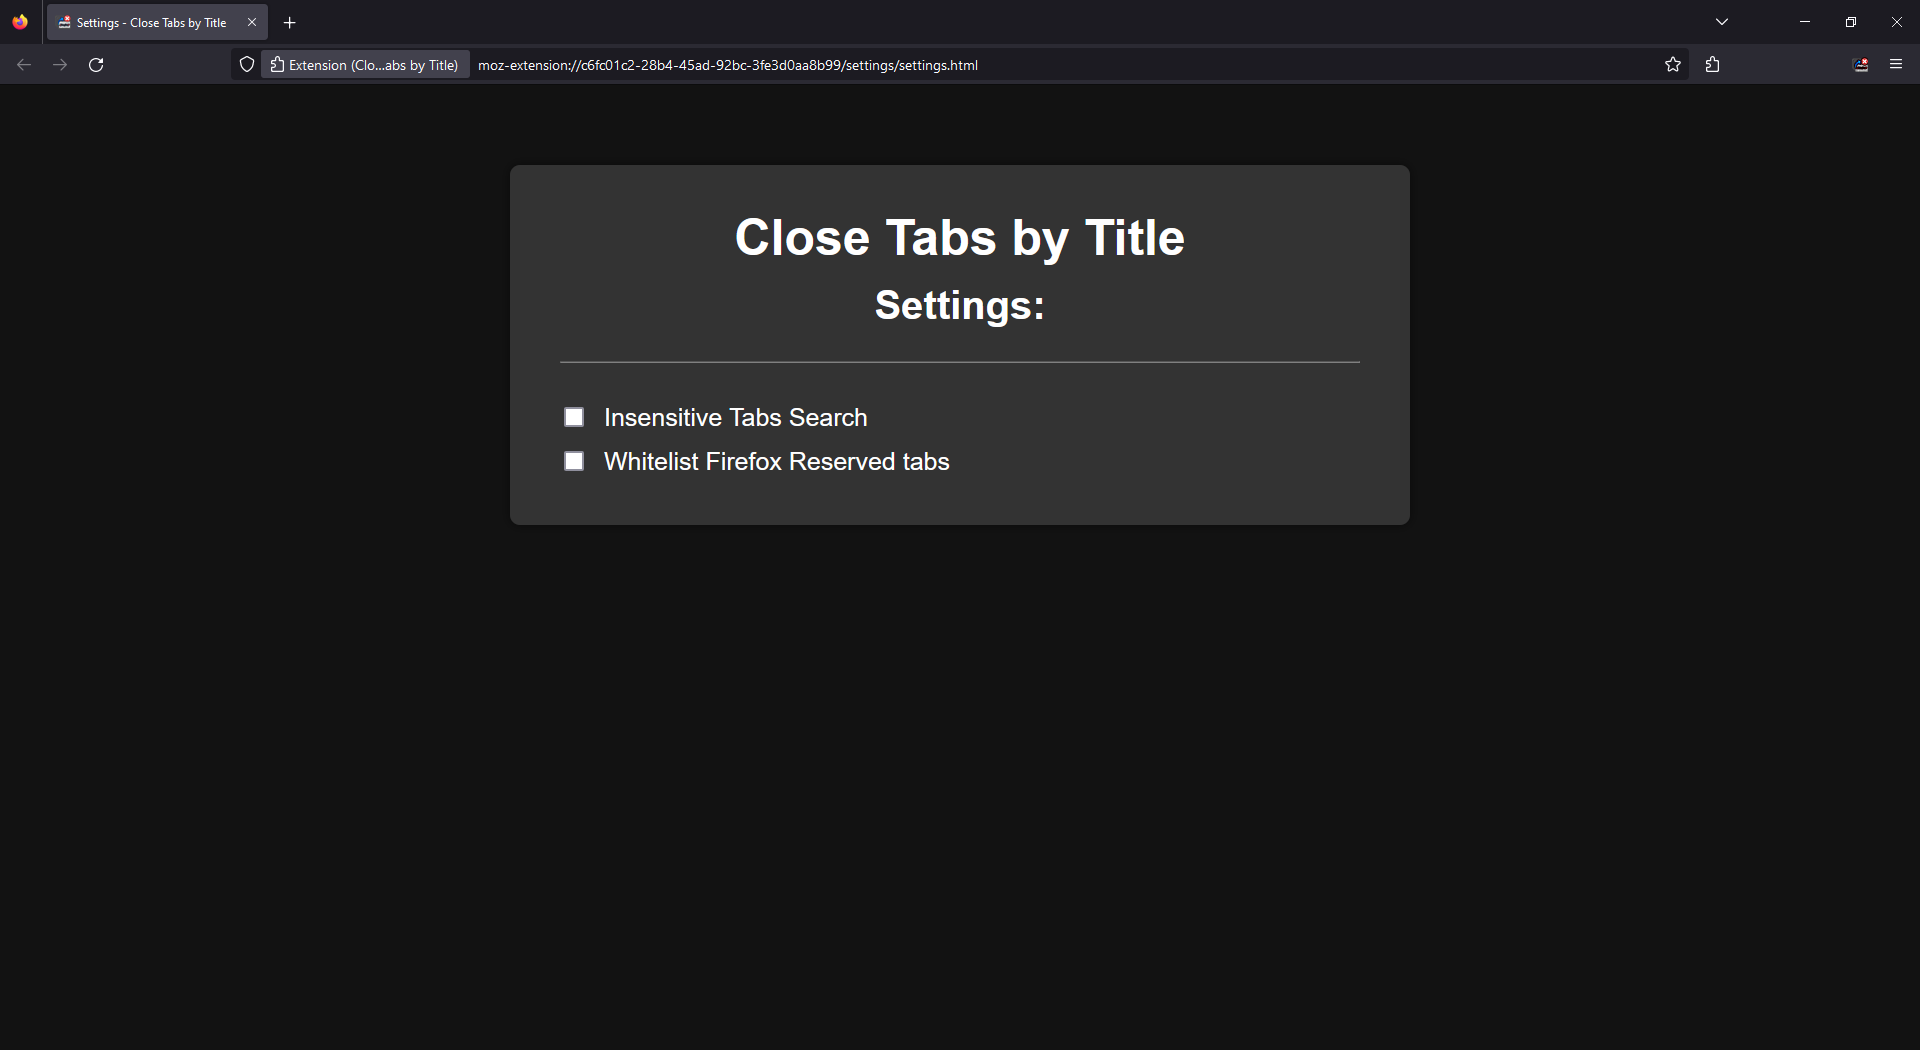 Close Tabs by Title